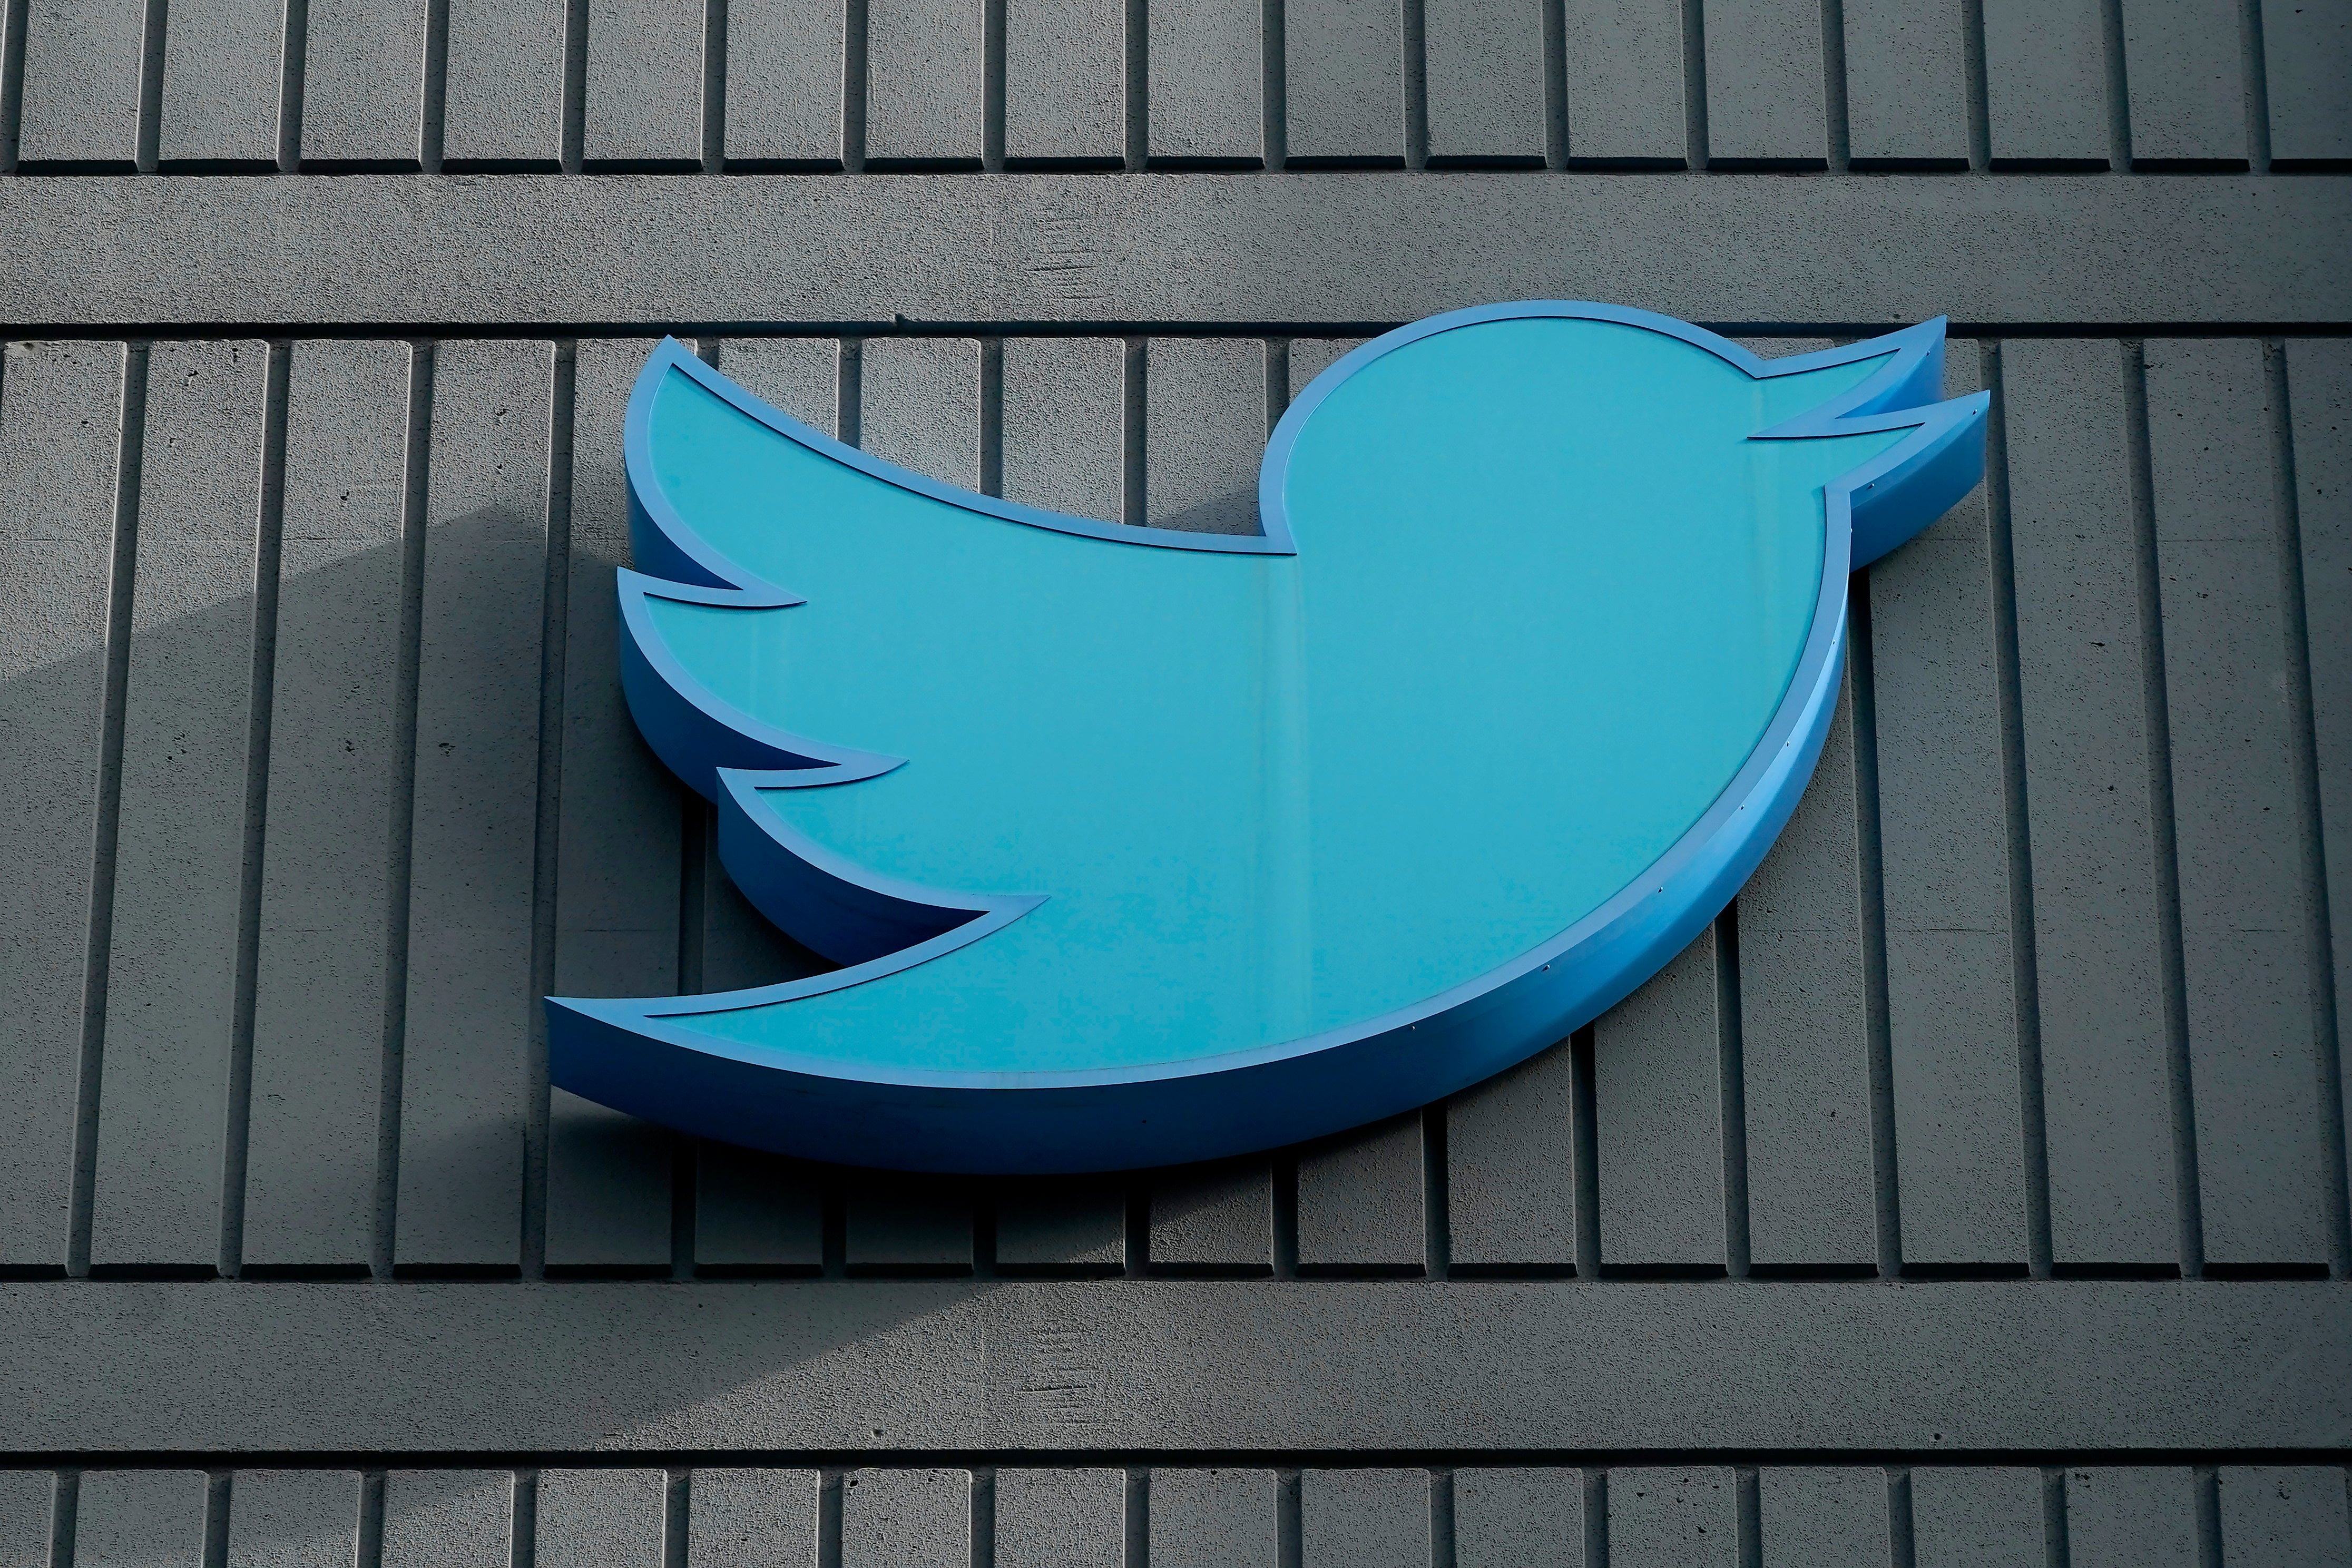 Company wide sackings started on Friday at Twitter